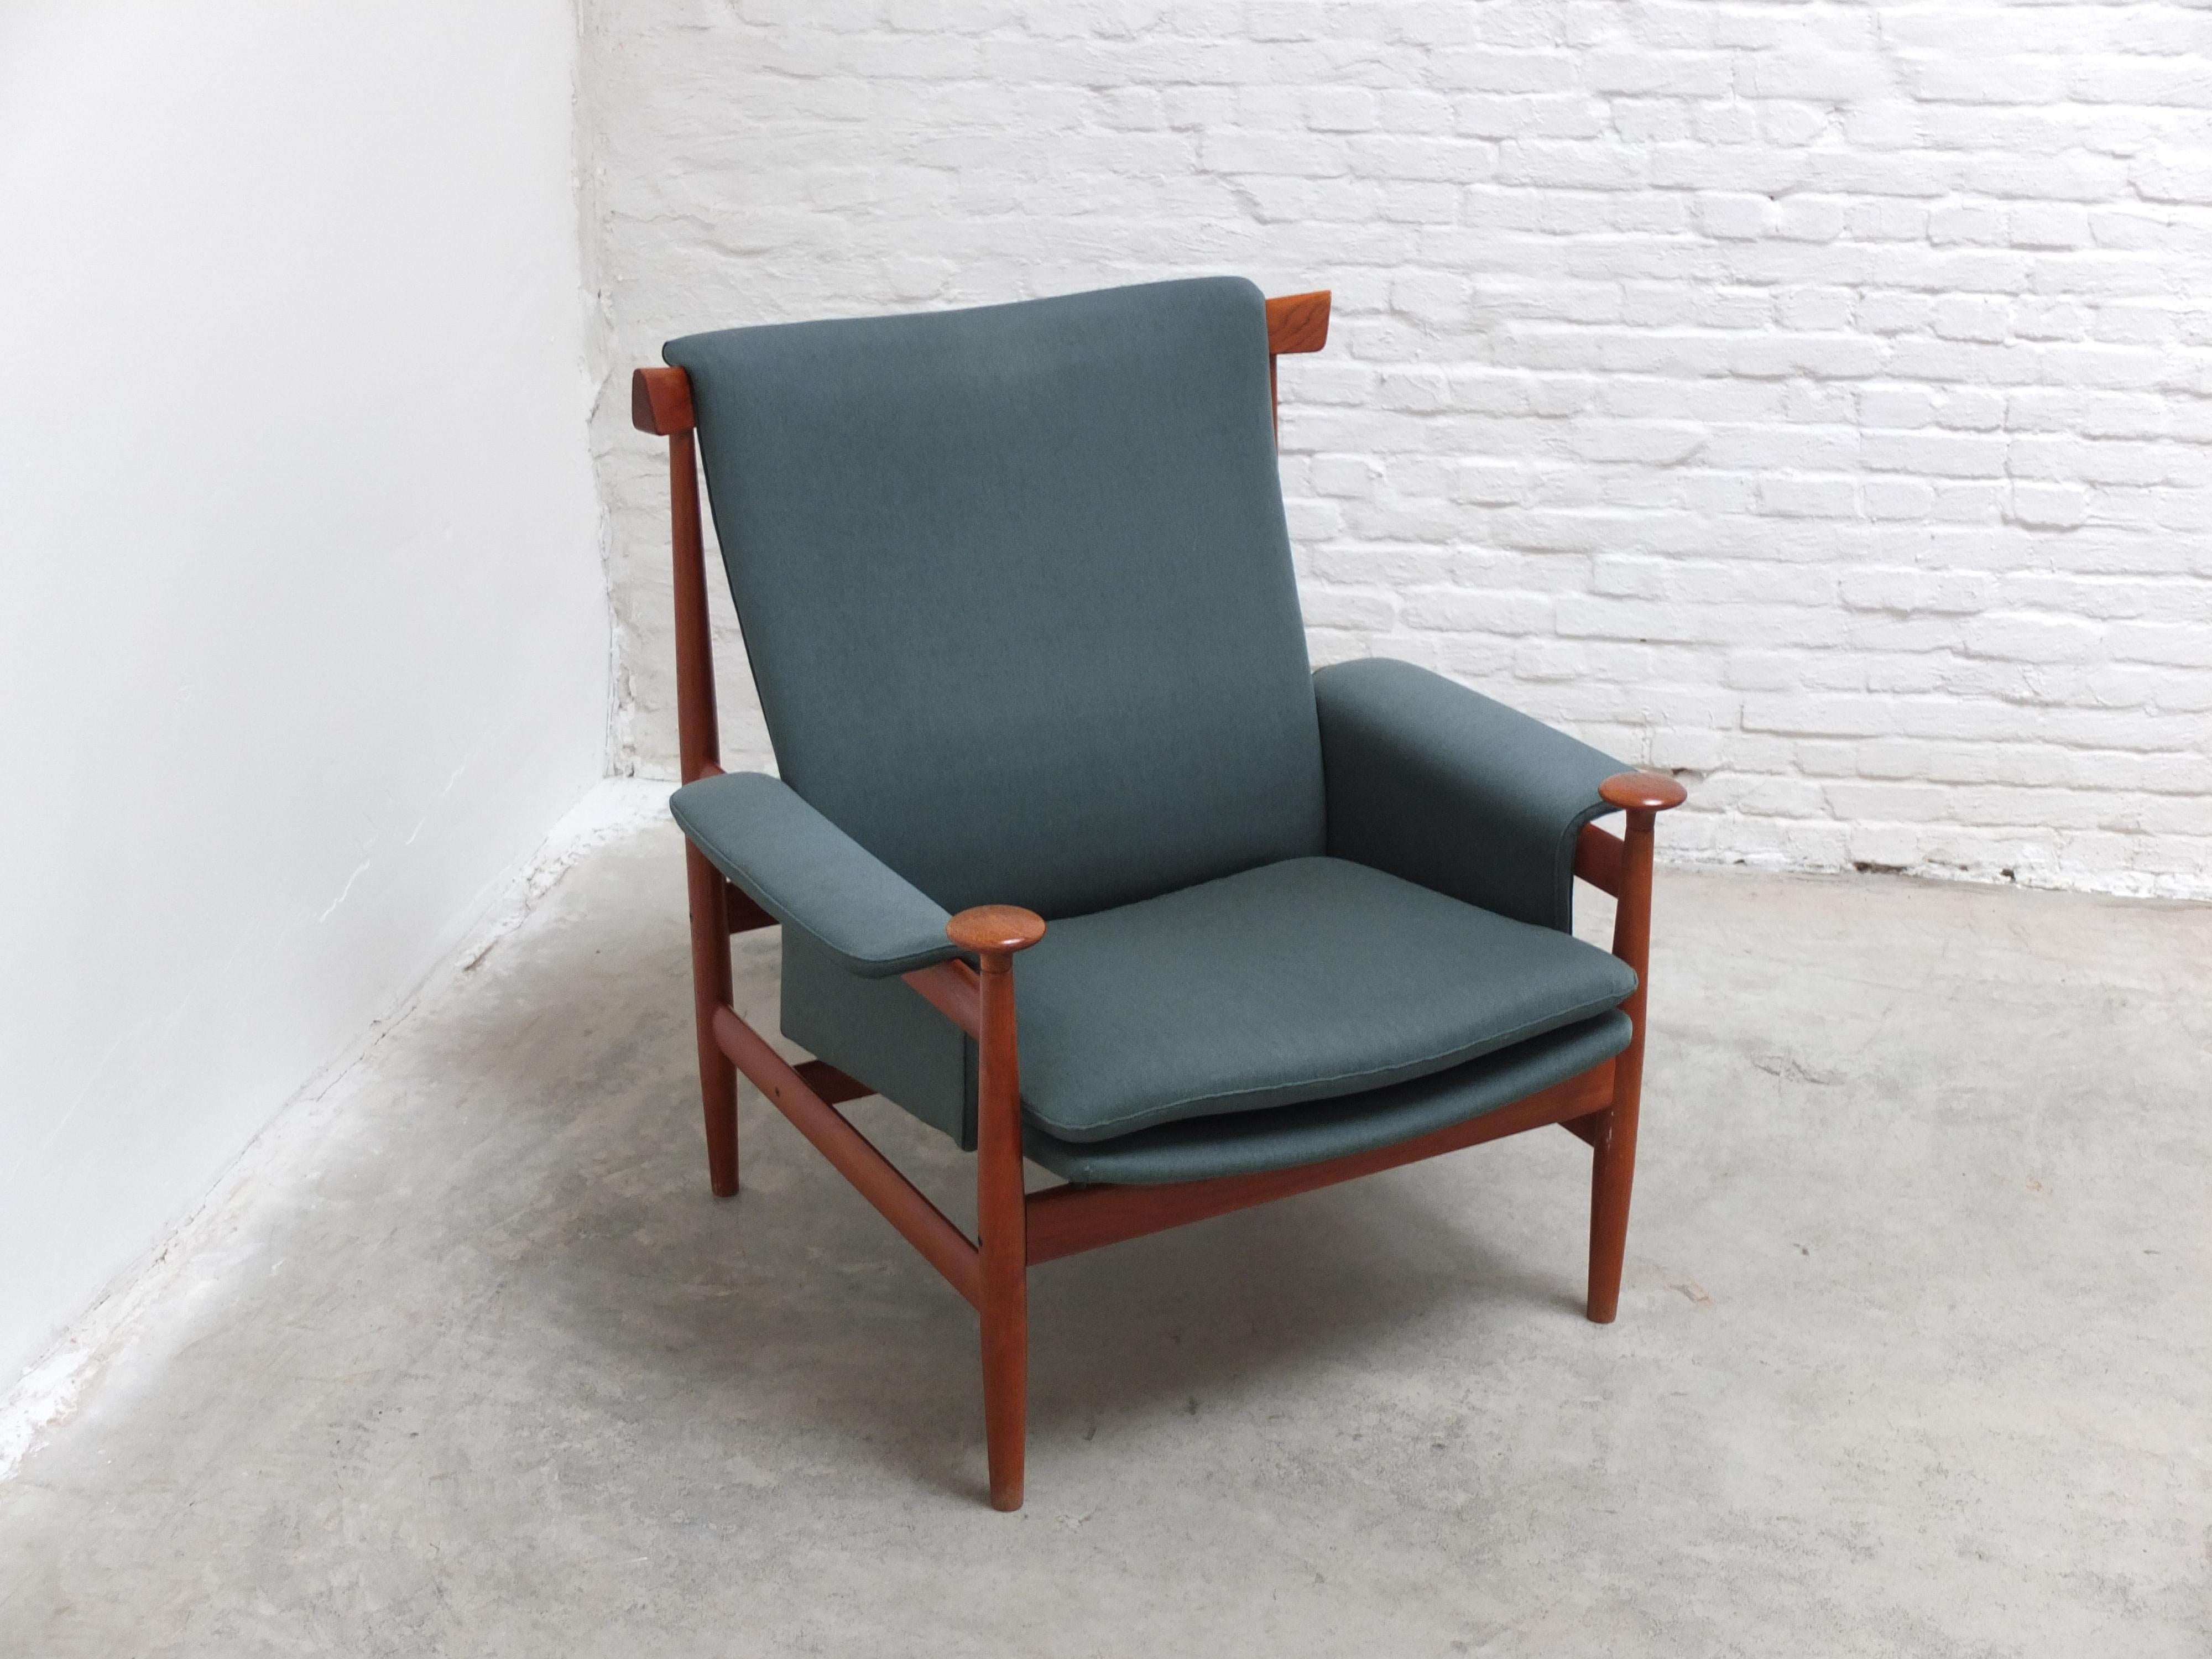 Danish Early 'Bwana' Lounge Chair by Finn Juhl for France & Son, 1962 For Sale